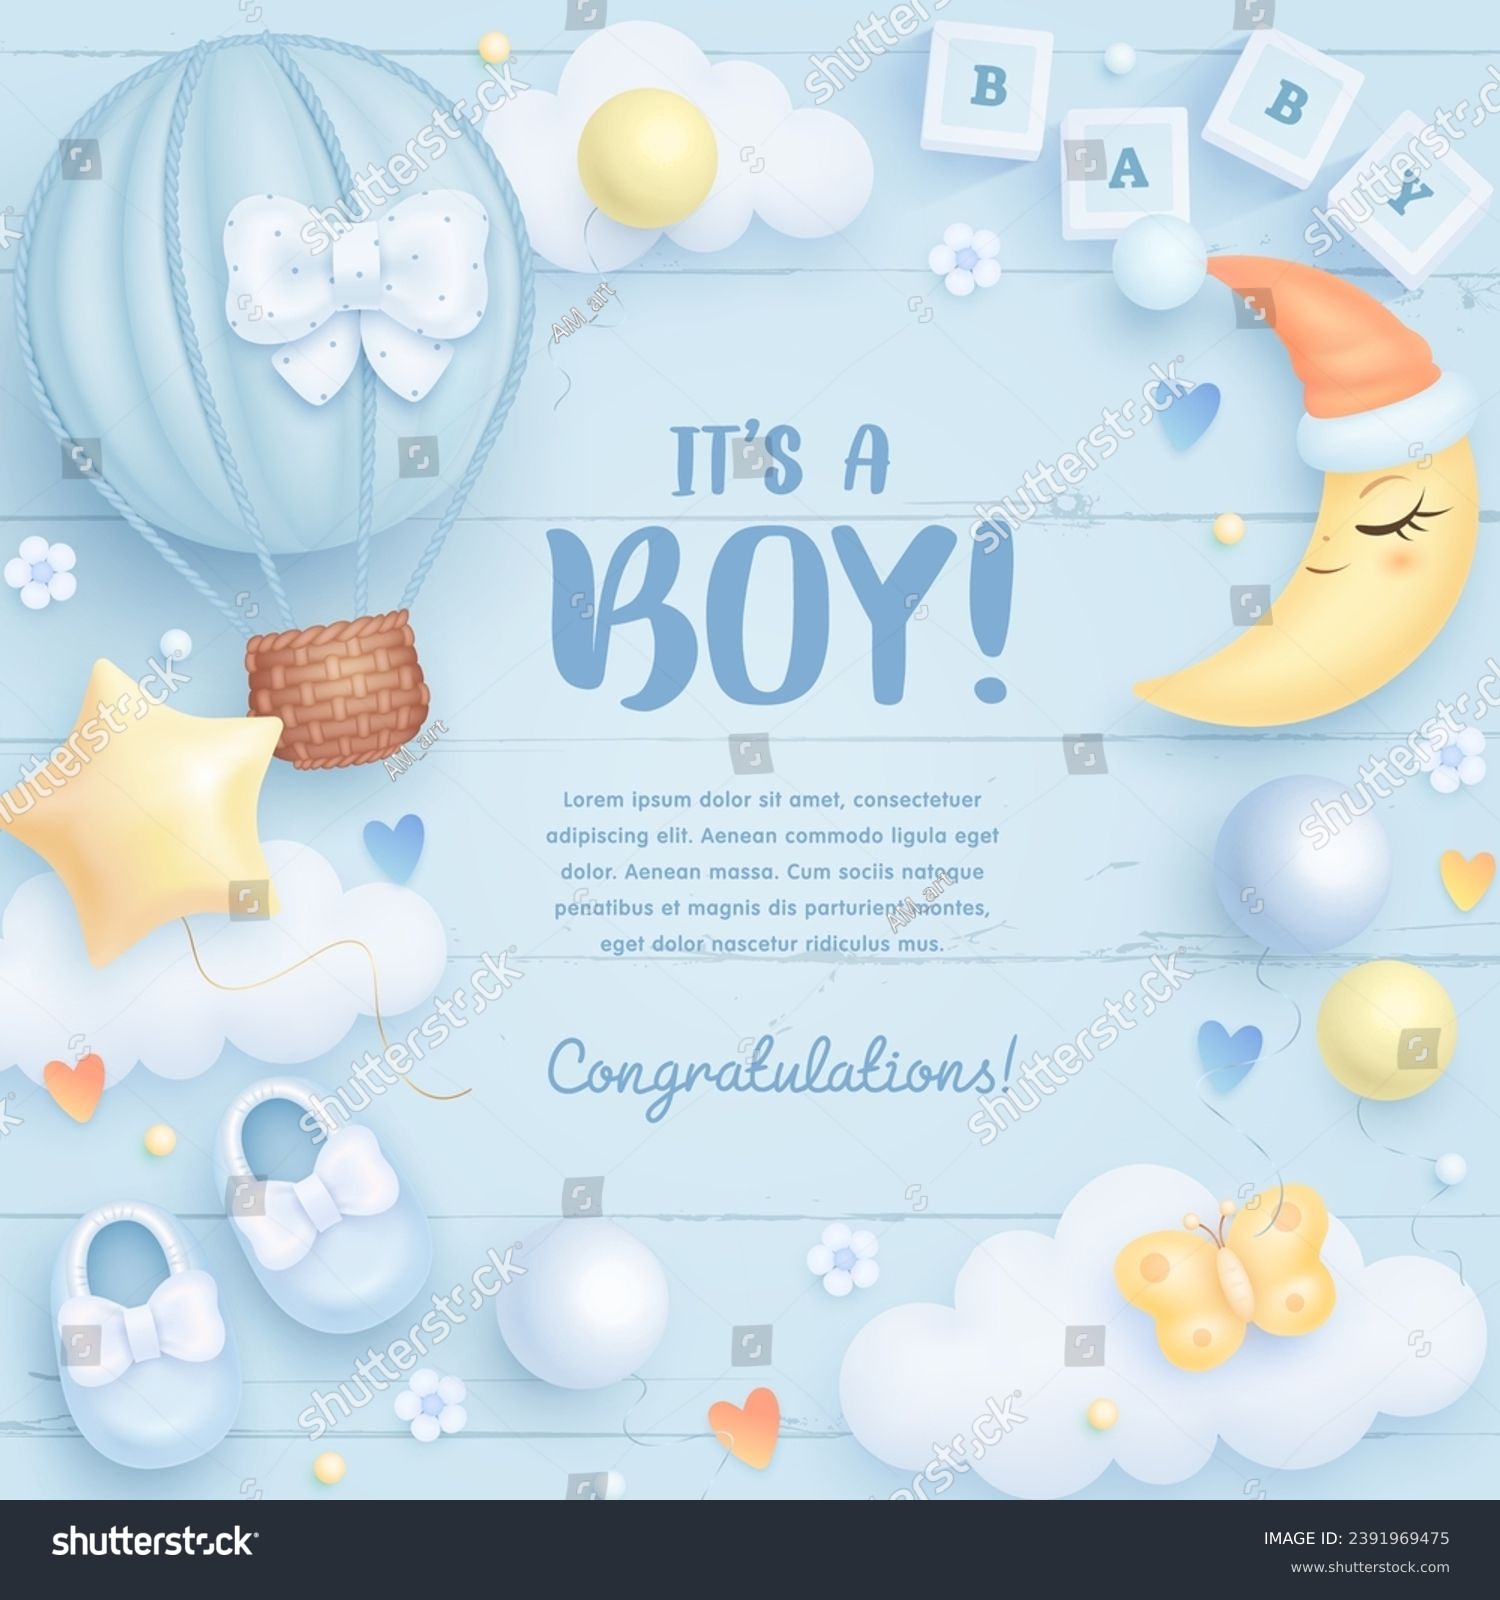 Baby shower square invitation, card, banner with cartoon hot air balloon, shoes, crescent moon and helium balloons on blue background. It's a boy. Vector illustration #2391969475